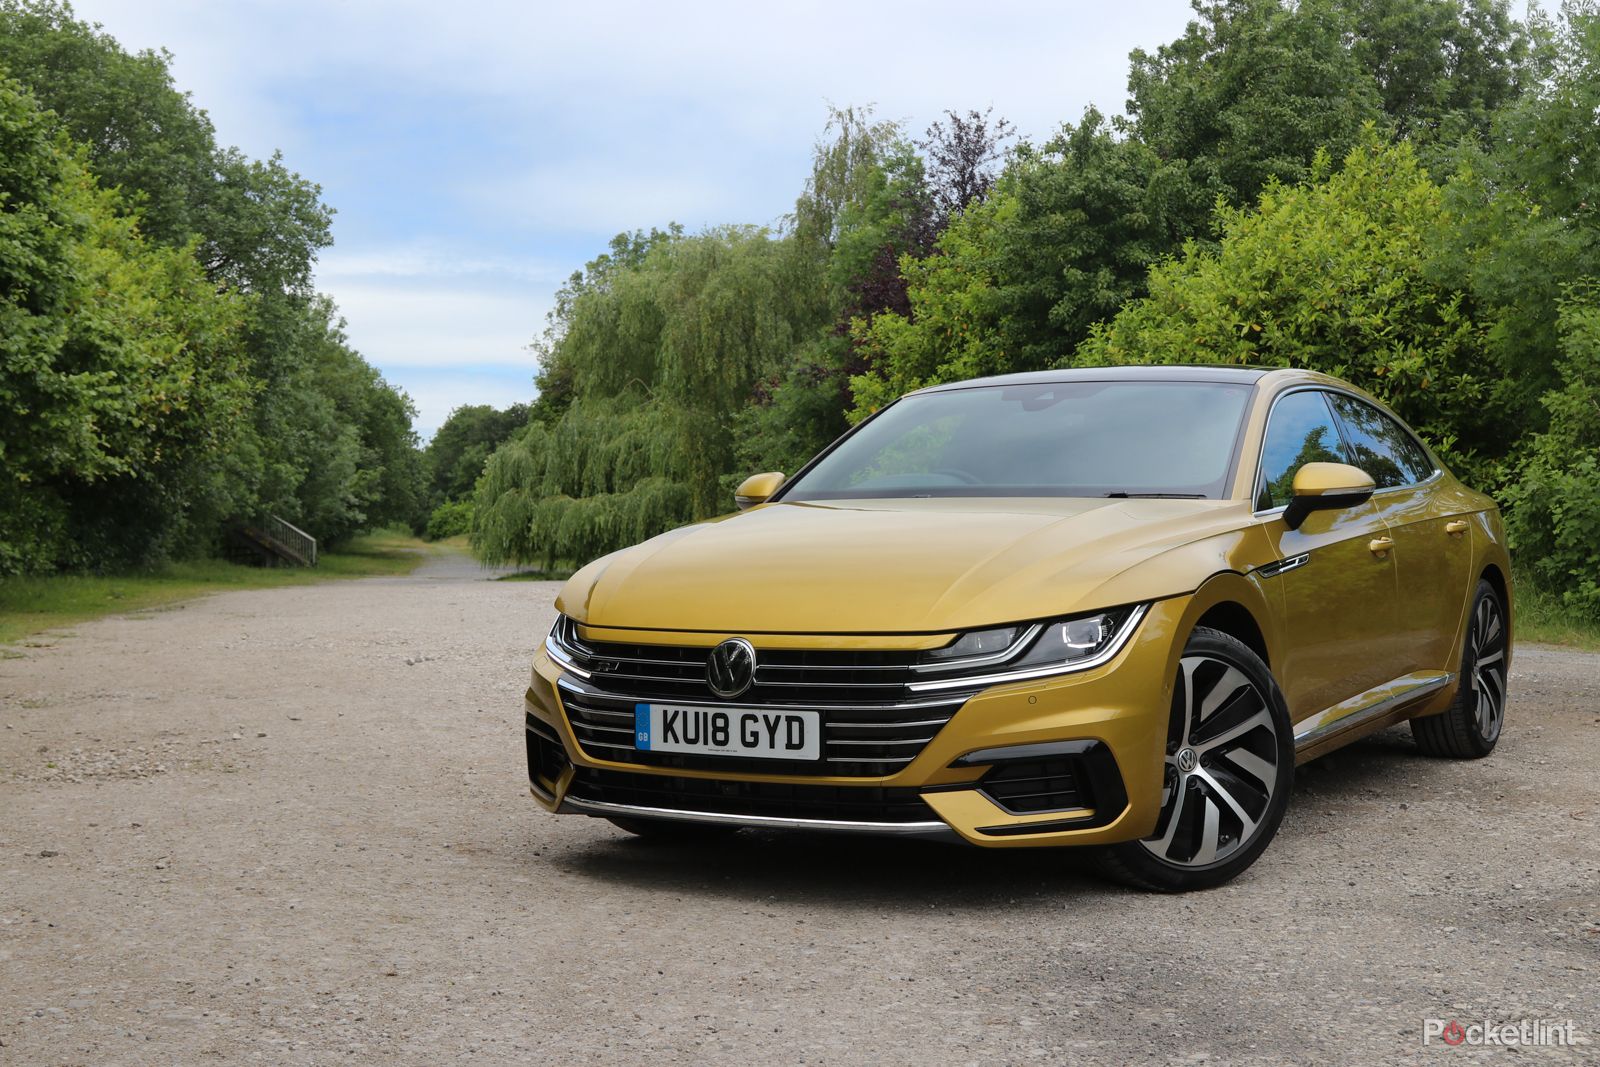 Volkswagen Arteon review: A big coupe with added spice